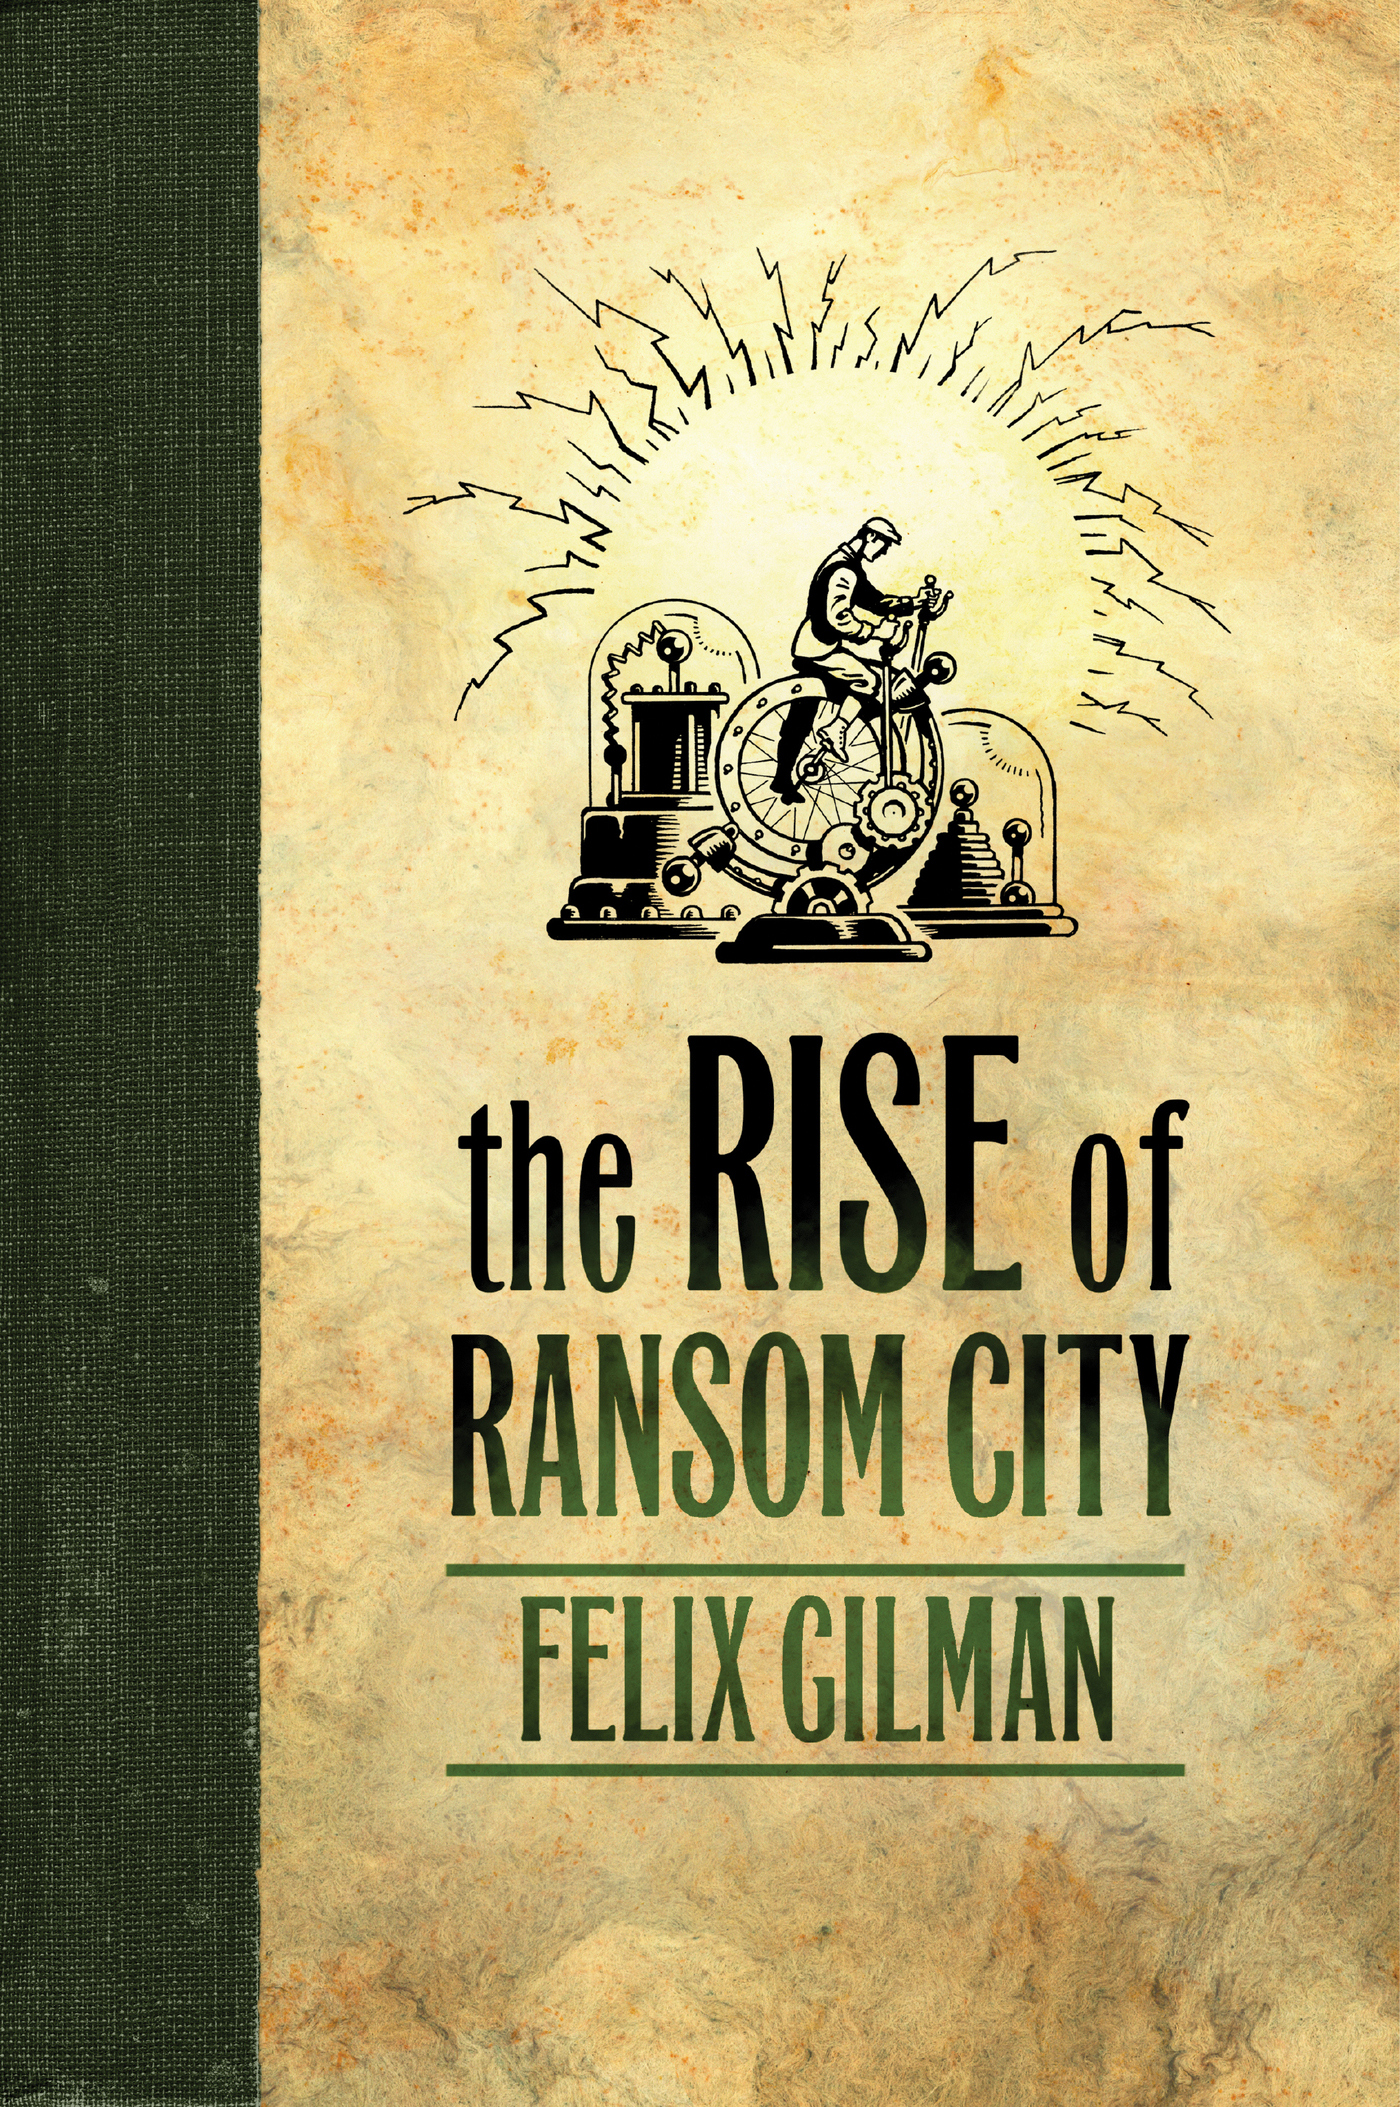 The Rise of Ransom City by Felix Gilman